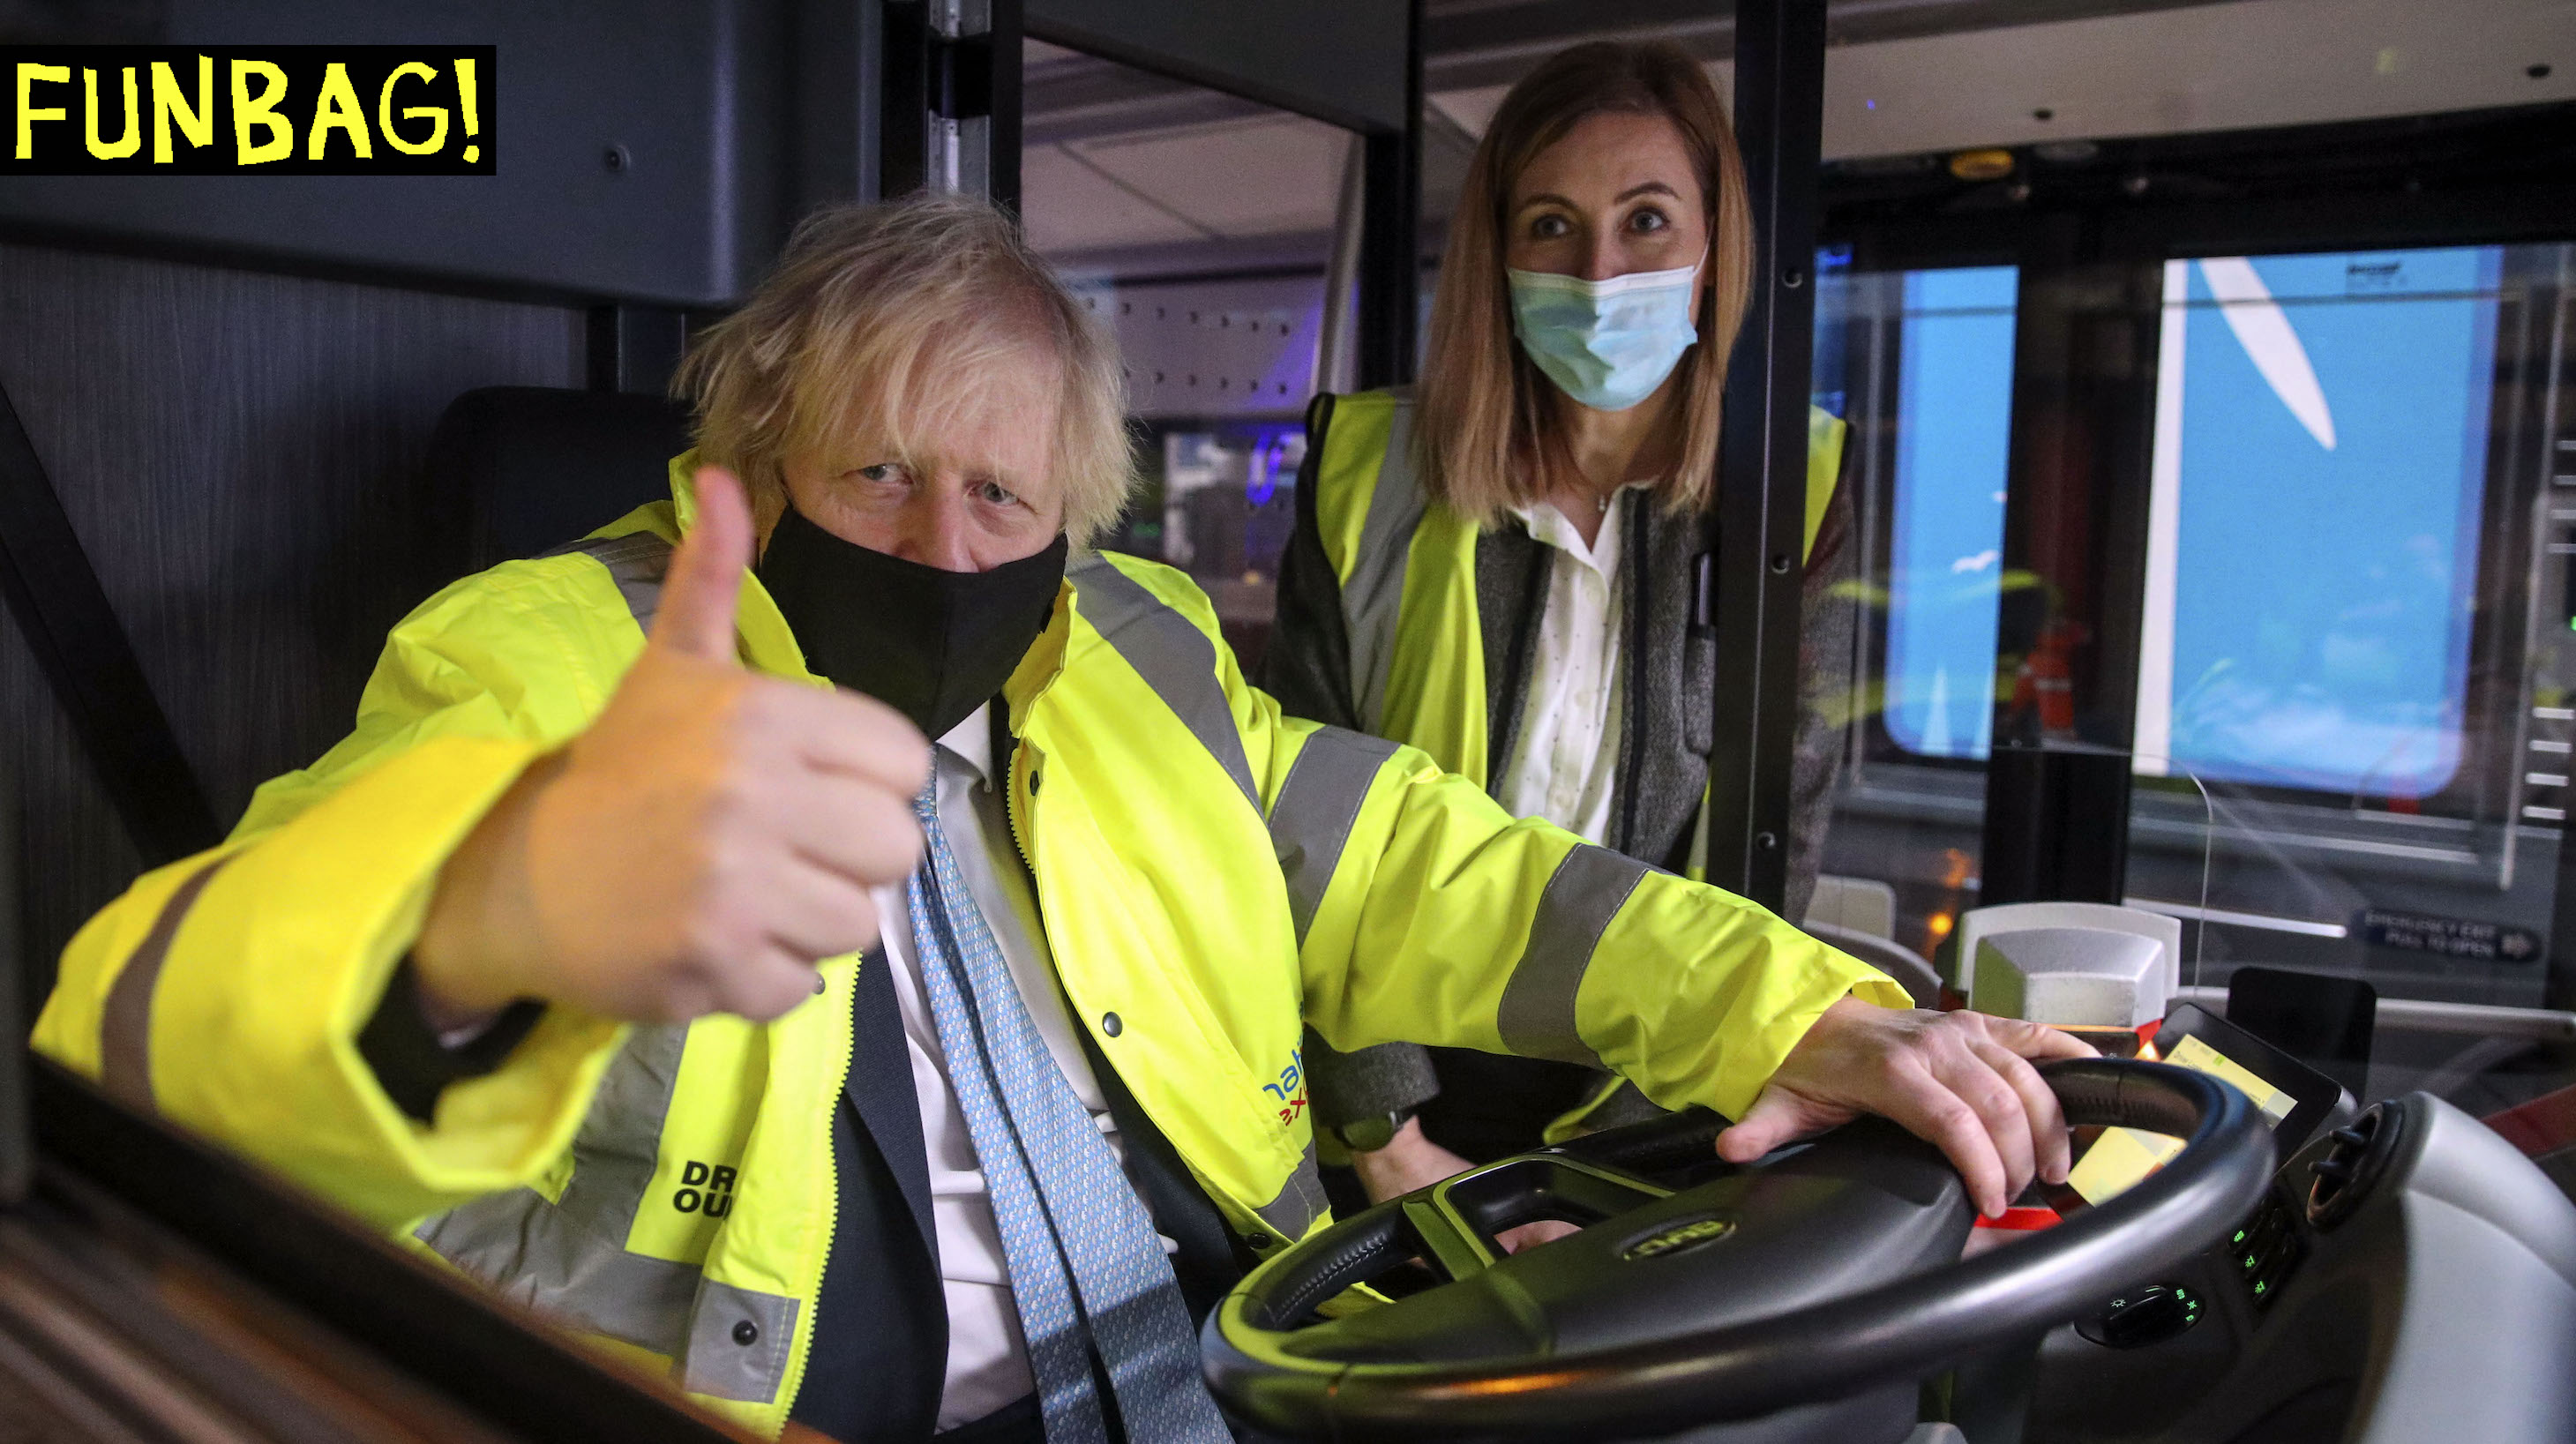 Prime Minister Boris Johnson alongside electric vehicles operations manager Agata Litwinowicz-Soltysiak during a visit to the National Express depot in Coventry. The Prime Minister is unveiling a shake-up of the bus sector which aims to see lower, simpler flat fares in towns and cities, turn-up-and-go services on main routes, and new flexible services to reconnect communities. Picture date: Monday March 15, 2021. PA Photo. See PA story POLITICS Bus. Photo credit should read: Steve Parsons/PA Wire